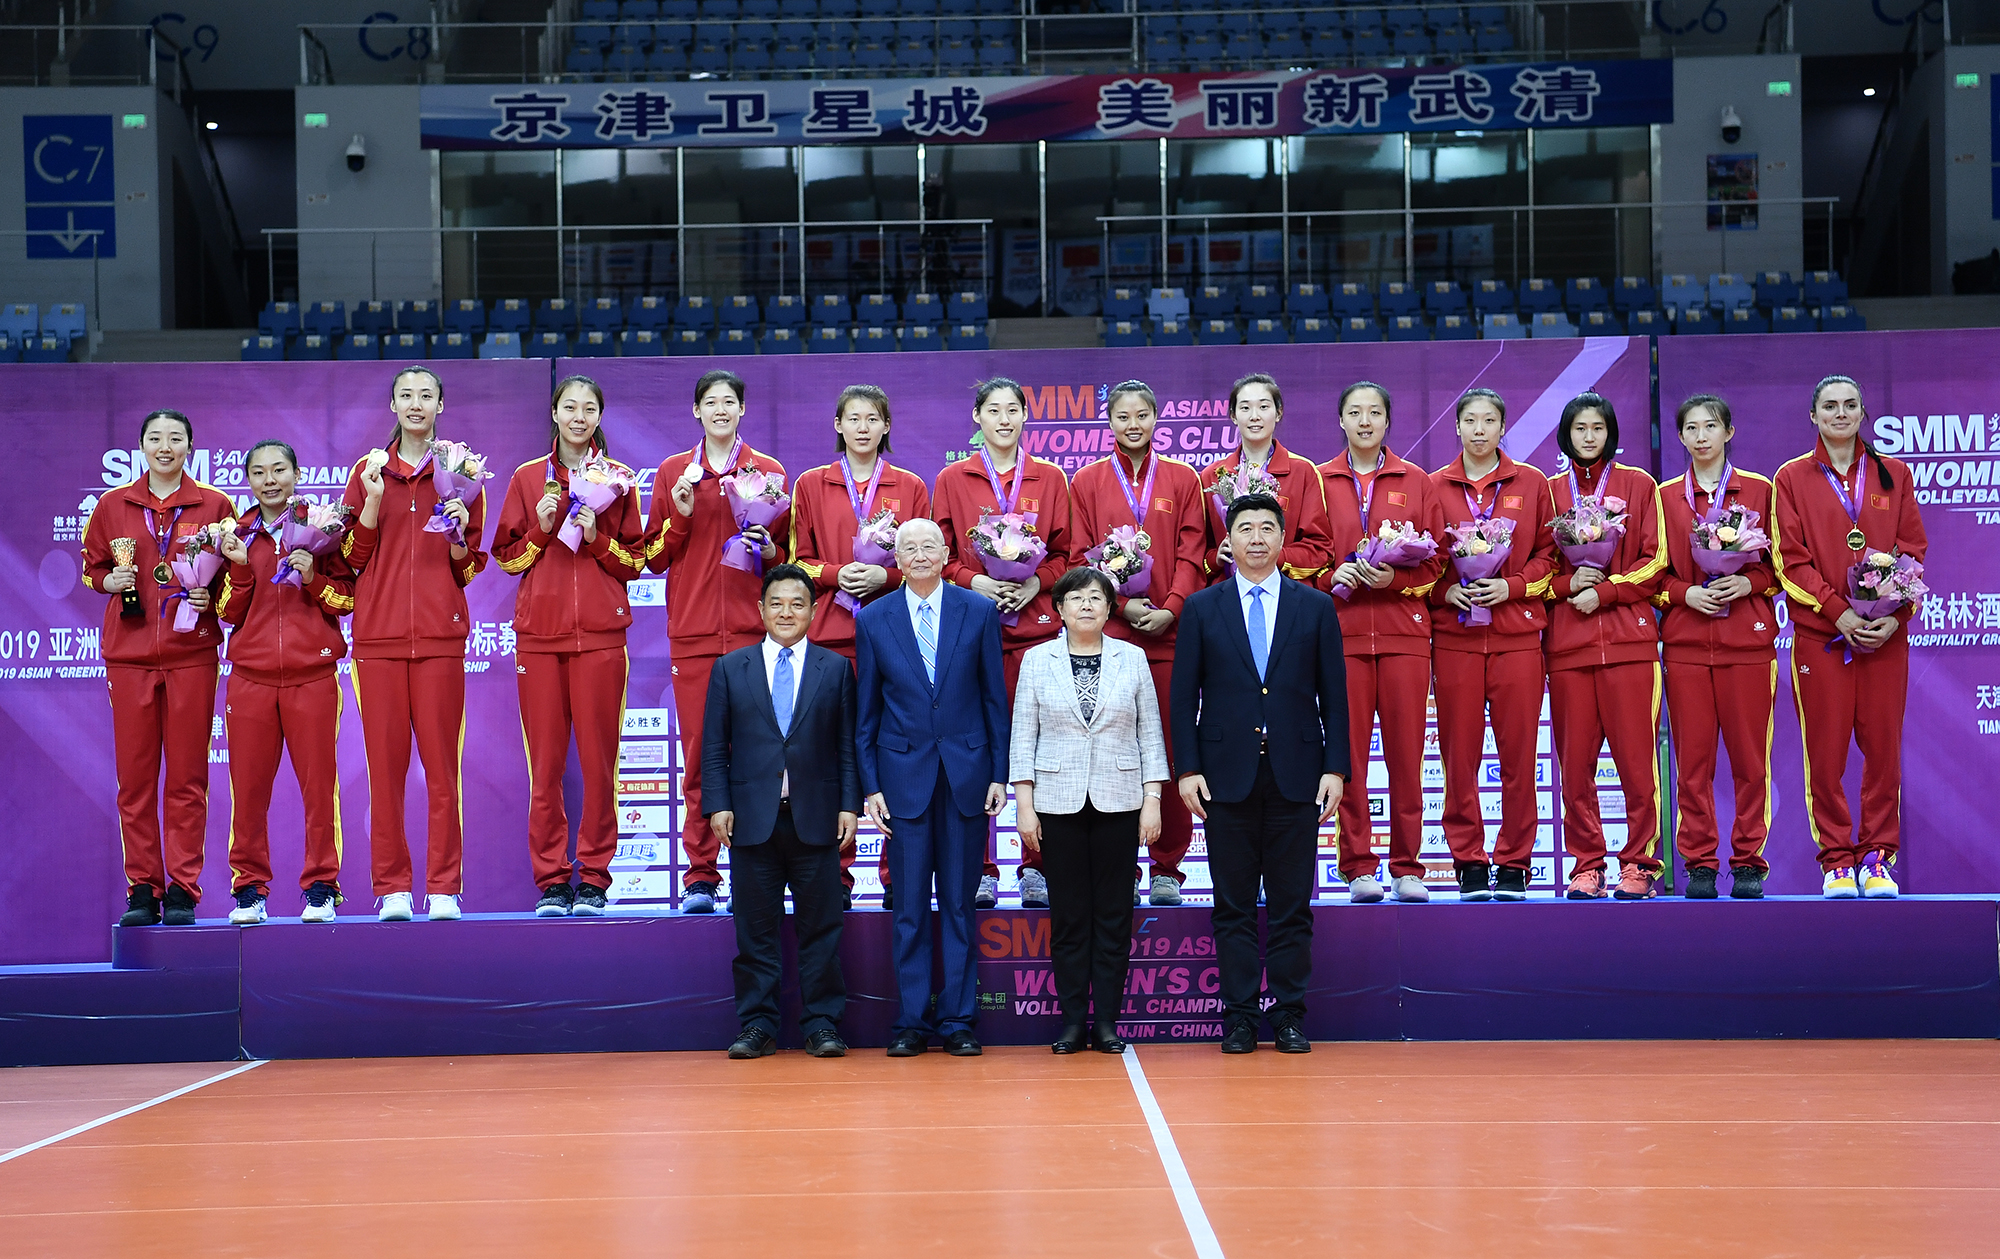 TIANJIN DETHRONE TITLE-HOLDERS SUPREME TO CAPTURE 5TH ASIAN WOMEN’S CLUB TITLE AT HOME